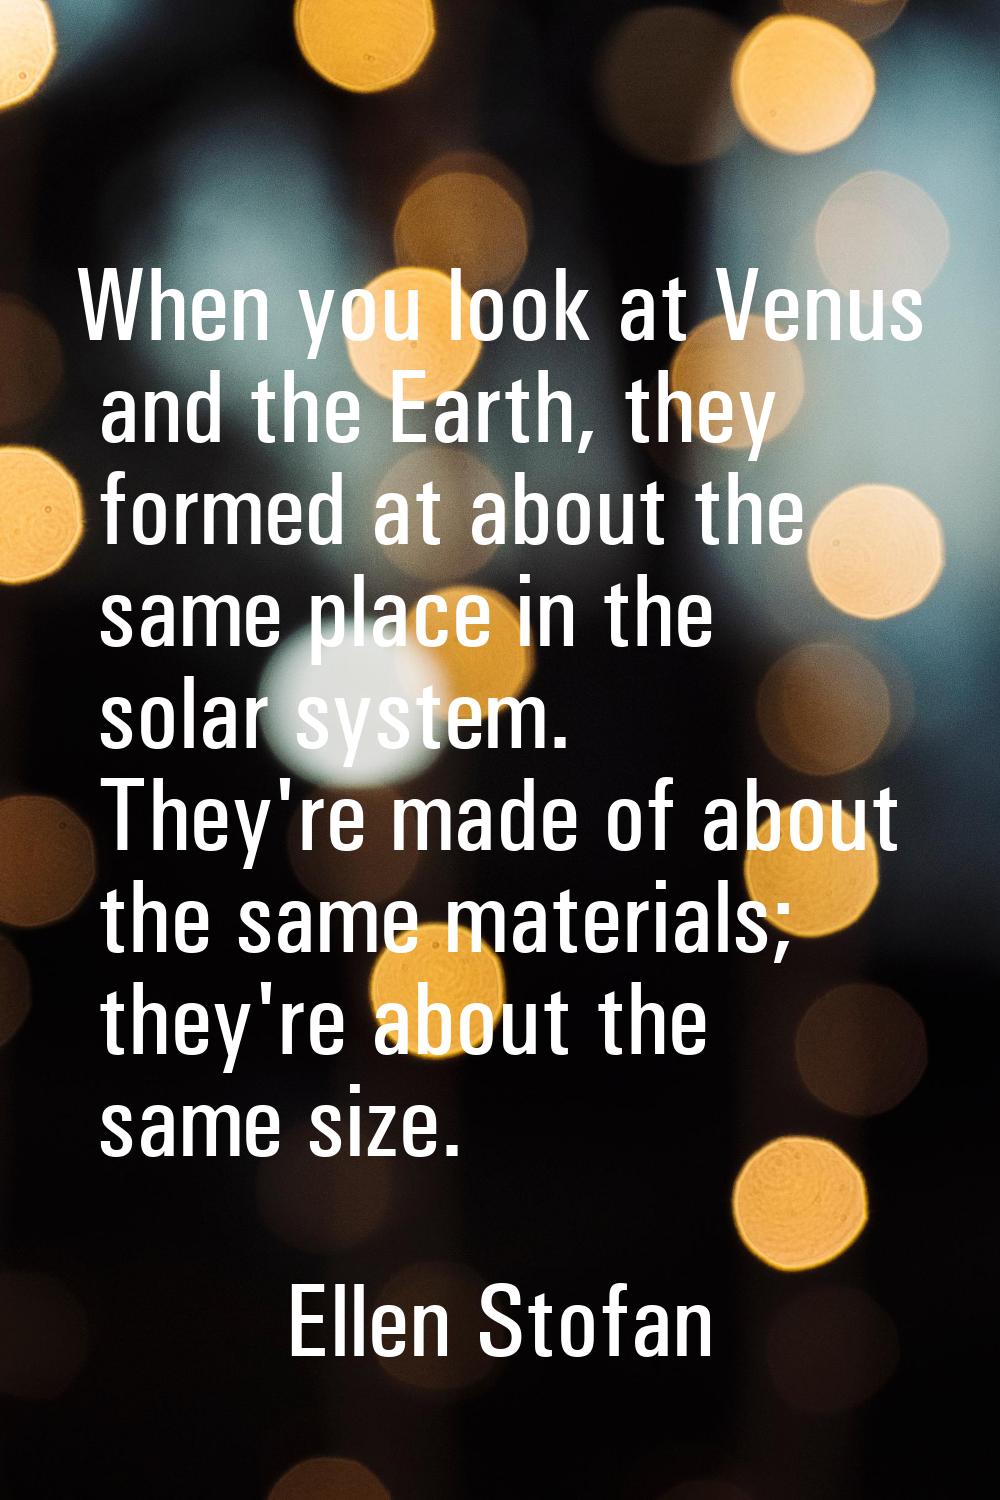 When you look at Venus and the Earth, they formed at about the same place in the solar system. They